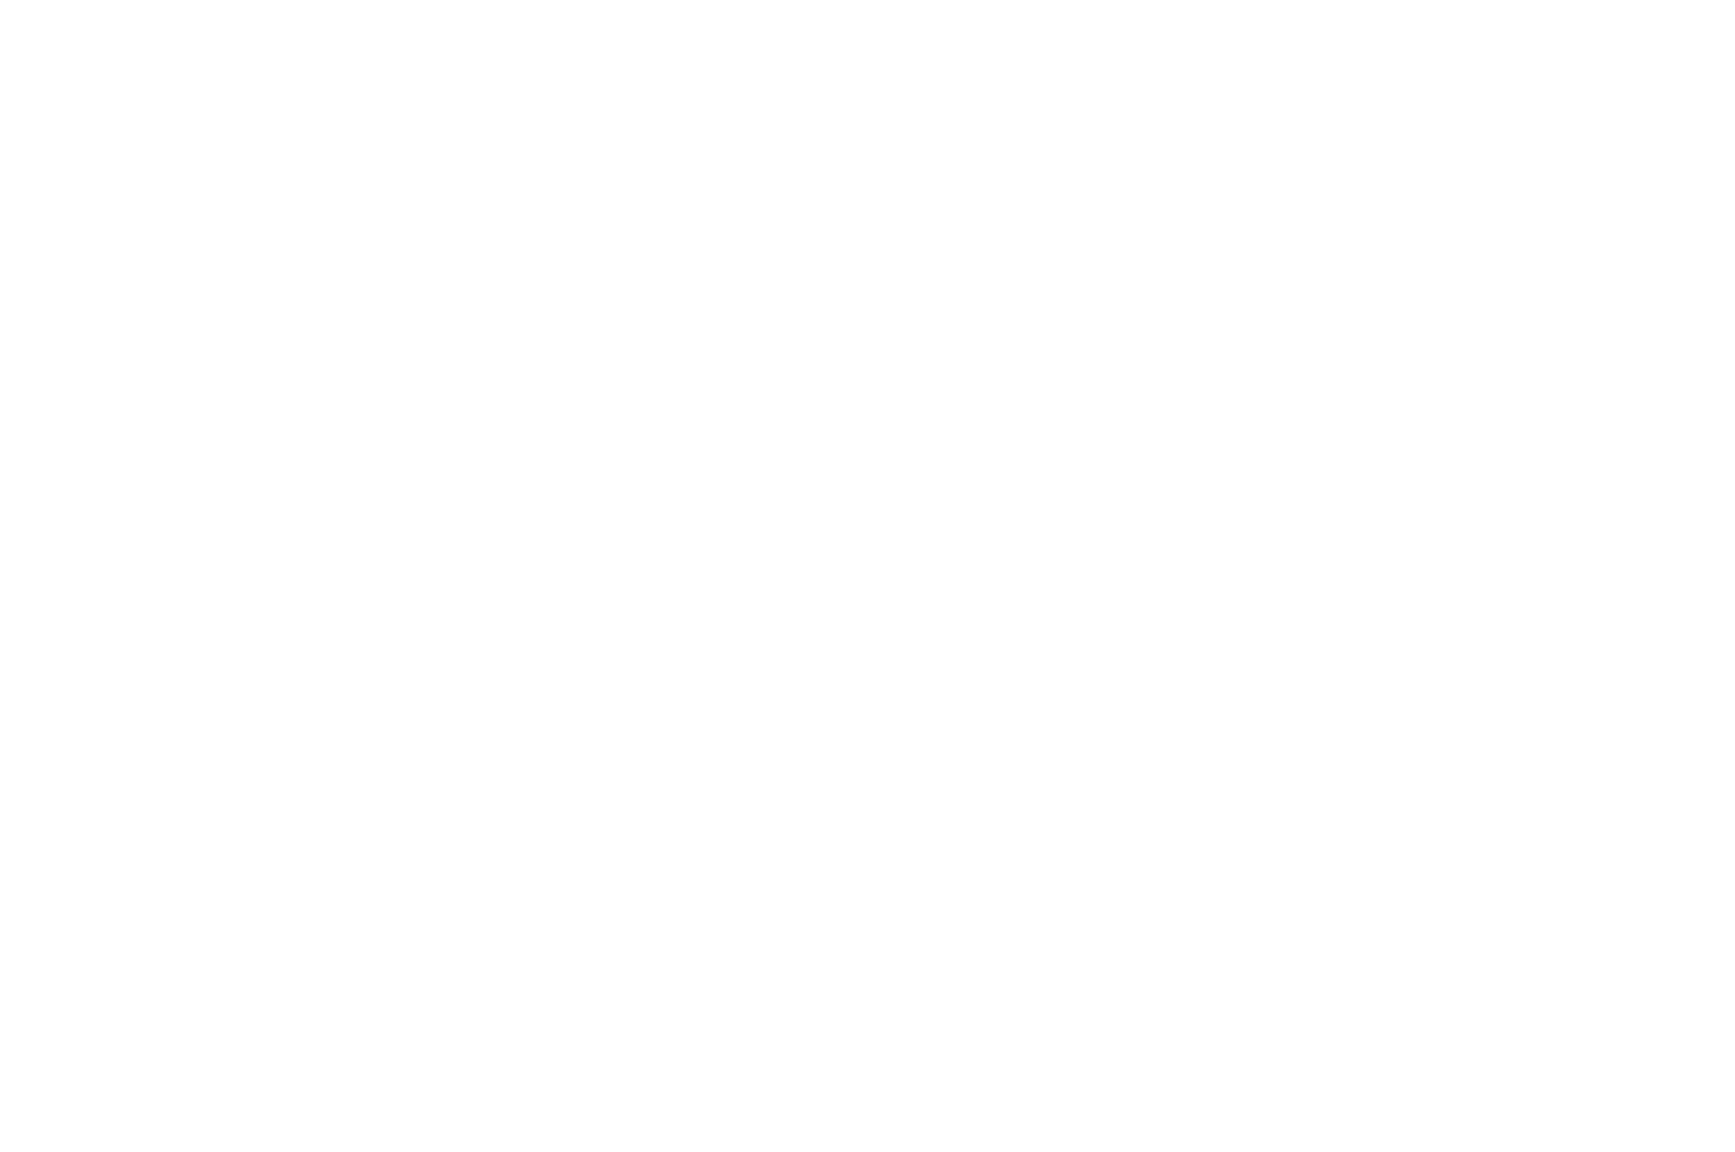 OFFICIAL SELECTION - WOODENGATE IFF - 2016.png